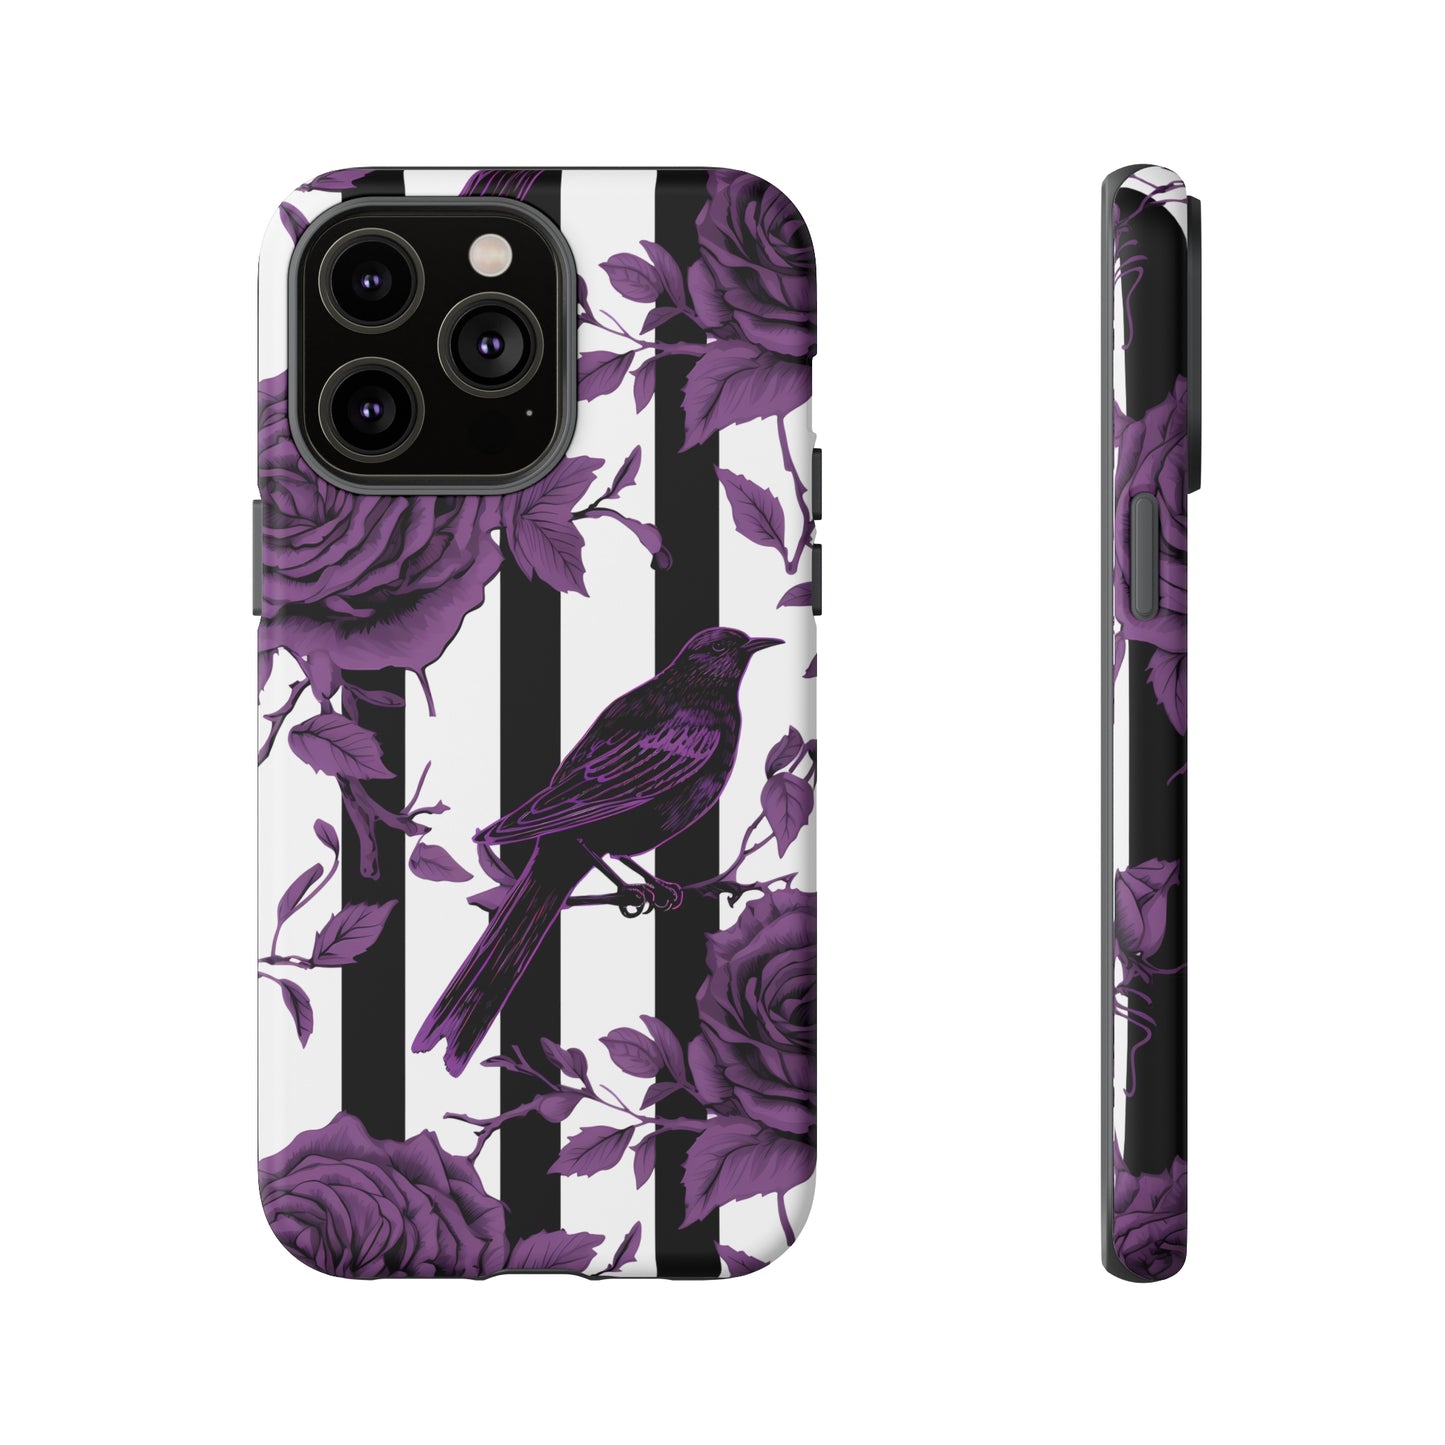 Striped Crows and Roses Tough Cases for iPhone Samsung Google PhonesPhone CaseVTZdesignsiPhone 14 Pro MaxMatteAccessoriescrowsGlossy